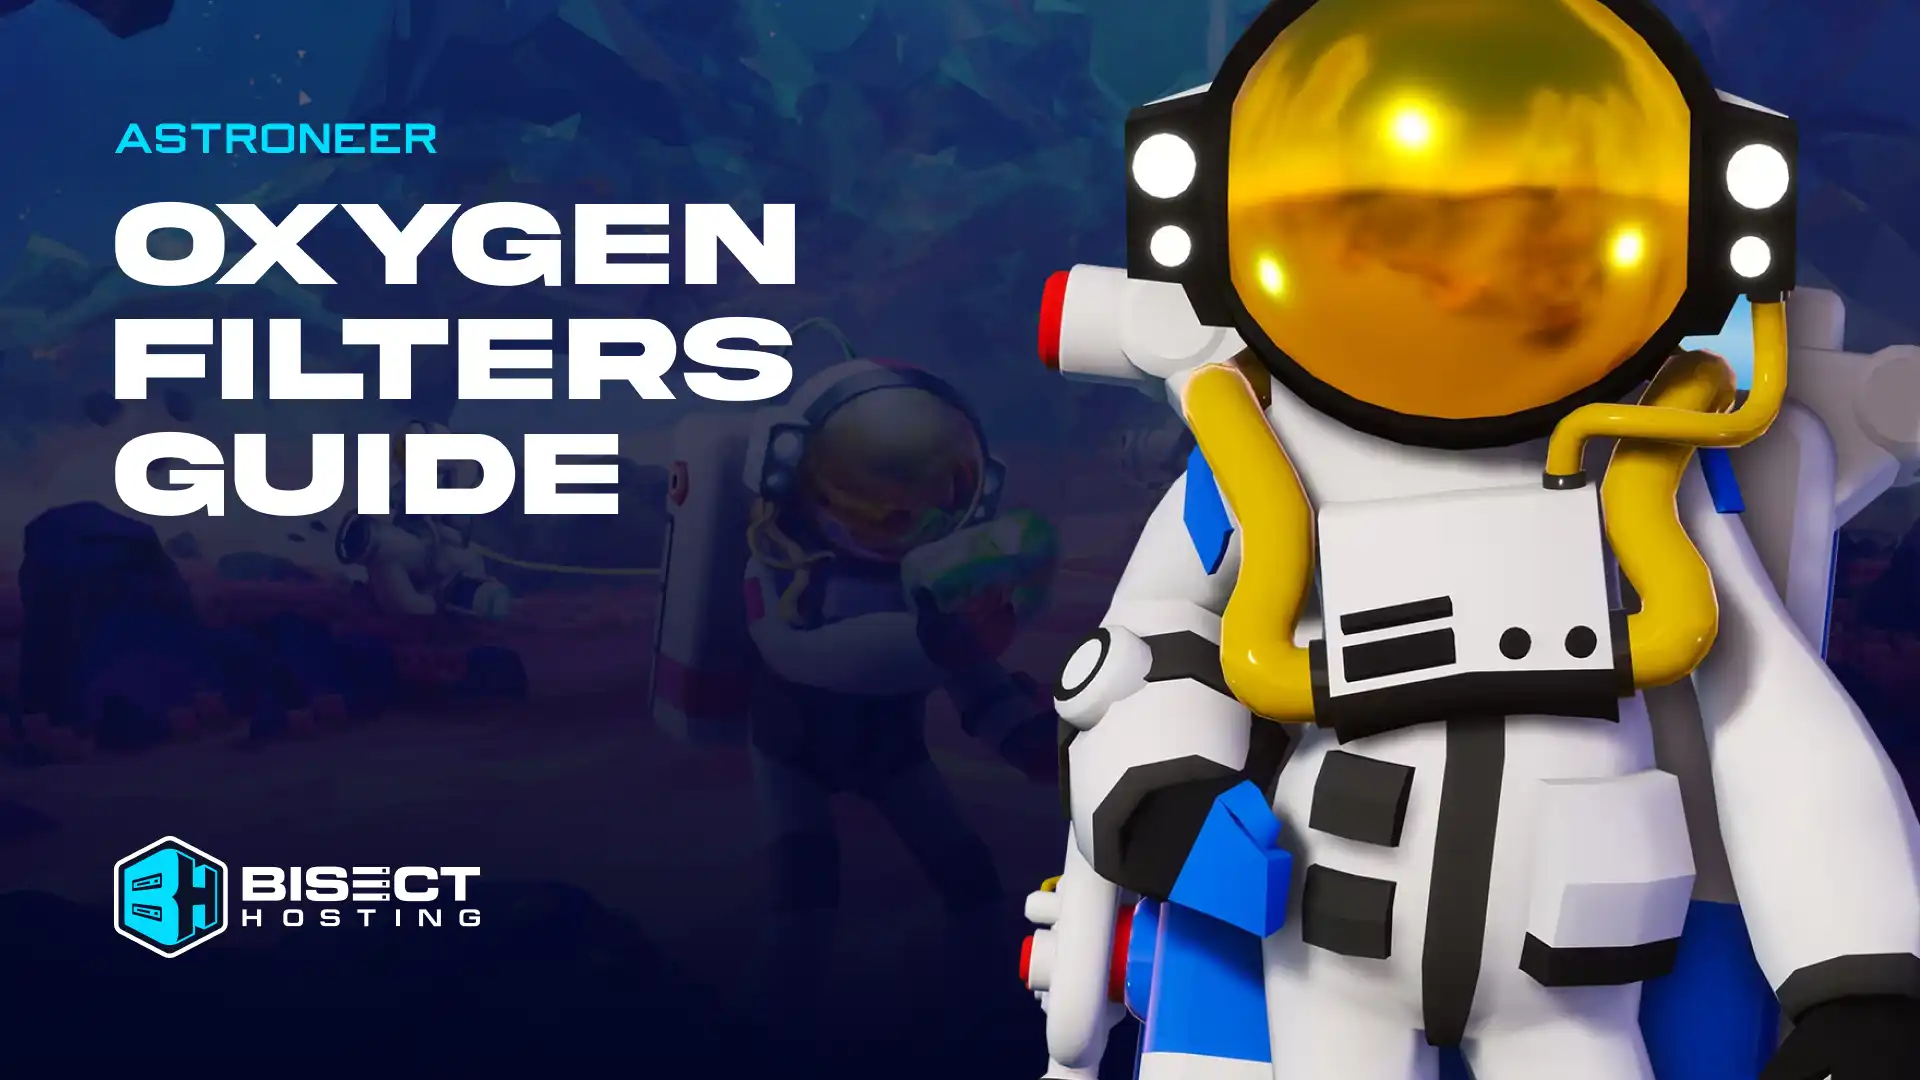 Astroneer Oxygen Filter Guide: How to Craft & Use